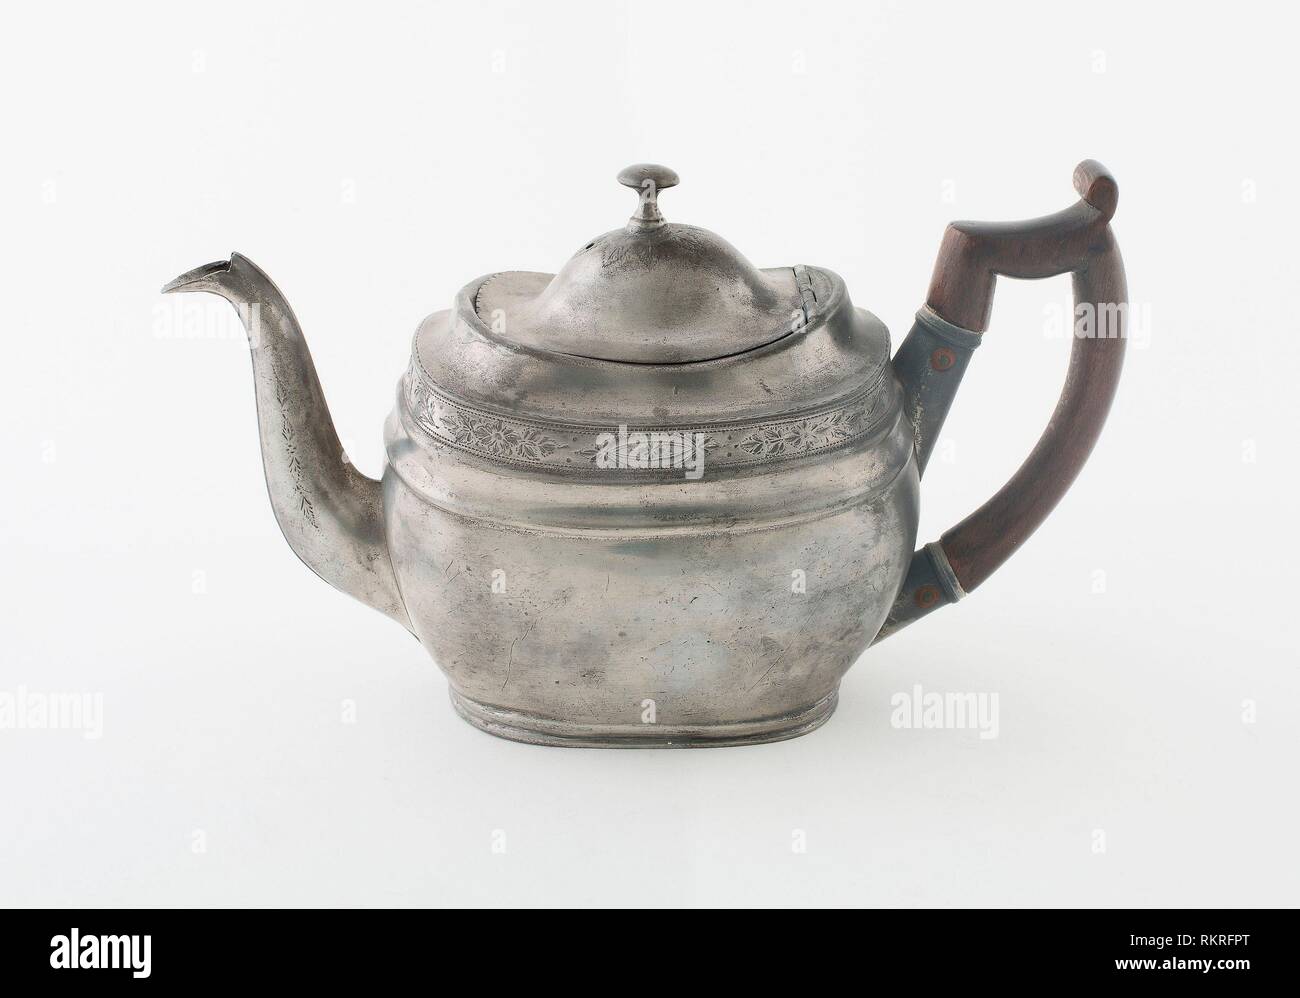 Teapot - About 1820 - Birch and Villers (John Birch and William Villers)  England, active c. 1775-1820 Birmingham, England - Artist: Birch and Stock  Photo - Alamy